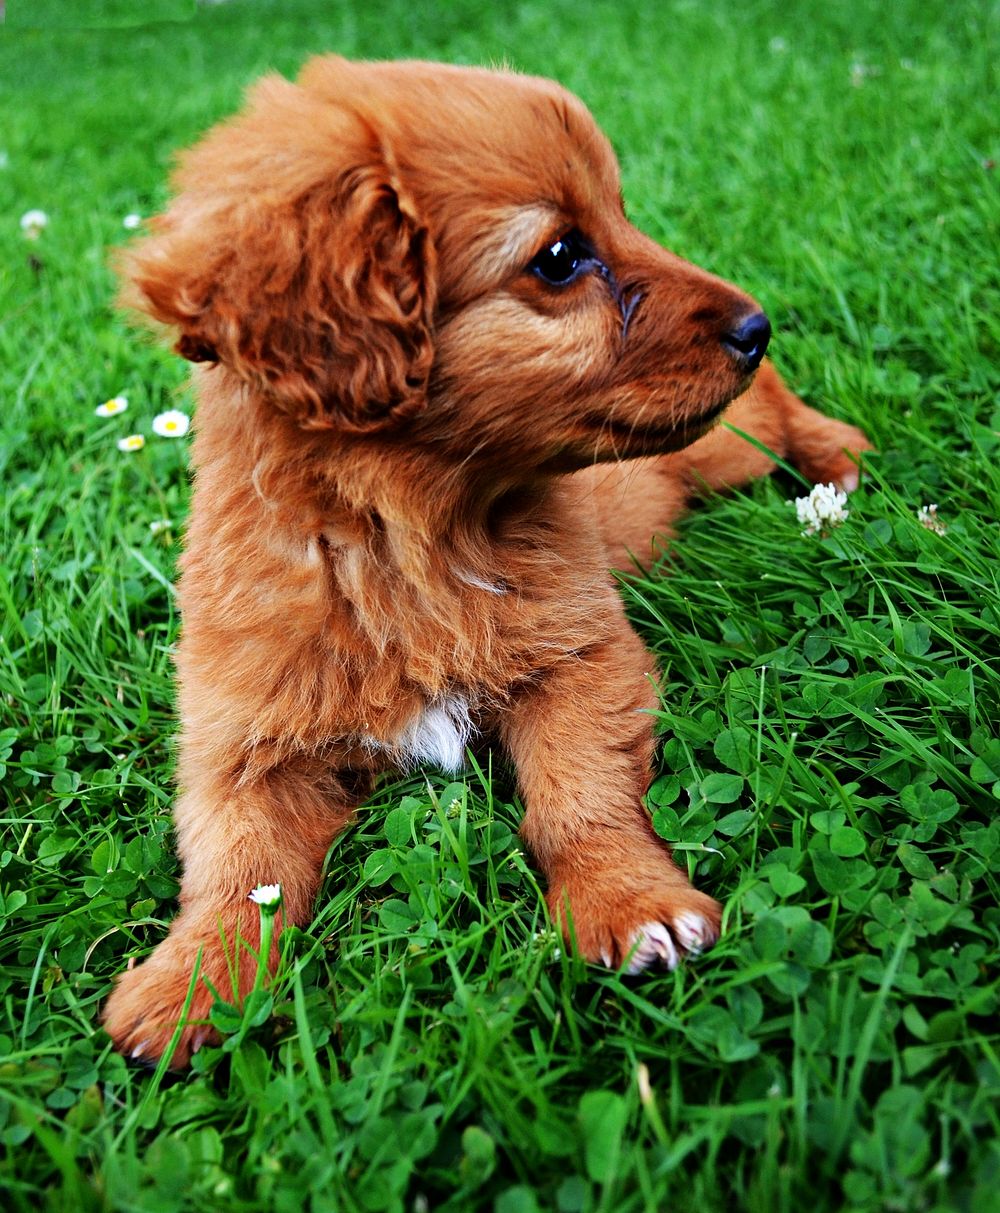 Free brown fluffy puppy on grass field image, public domain animal CC0 photo.